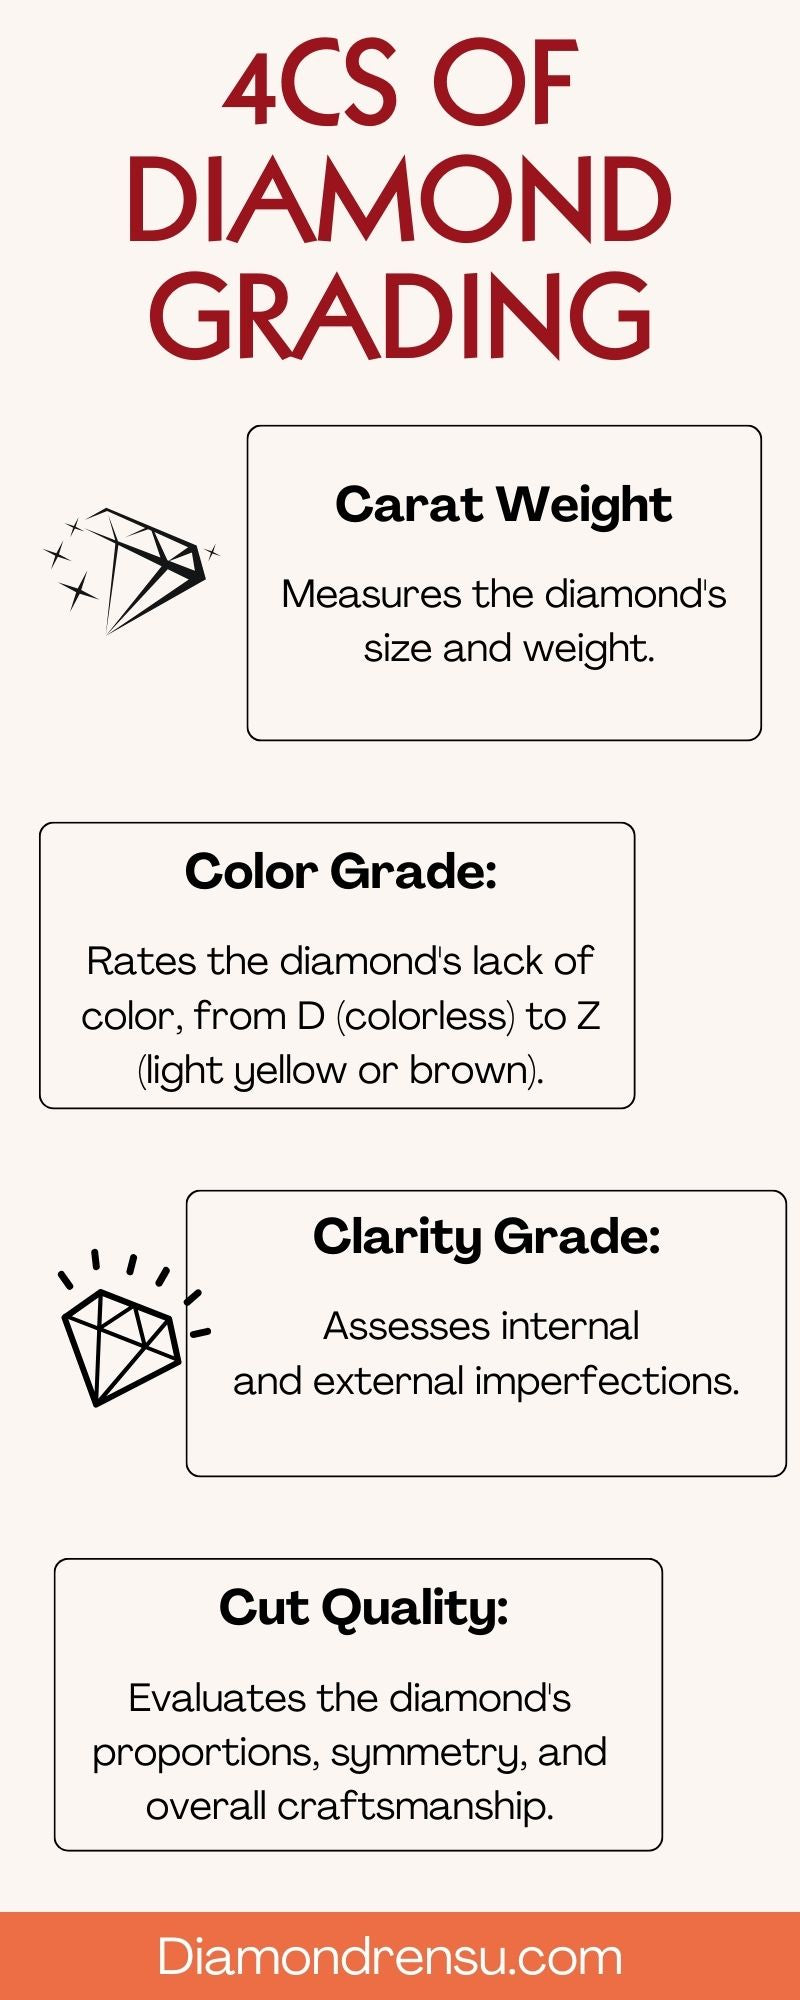 Four criteria of diamond shown in picture by which diamond is graded